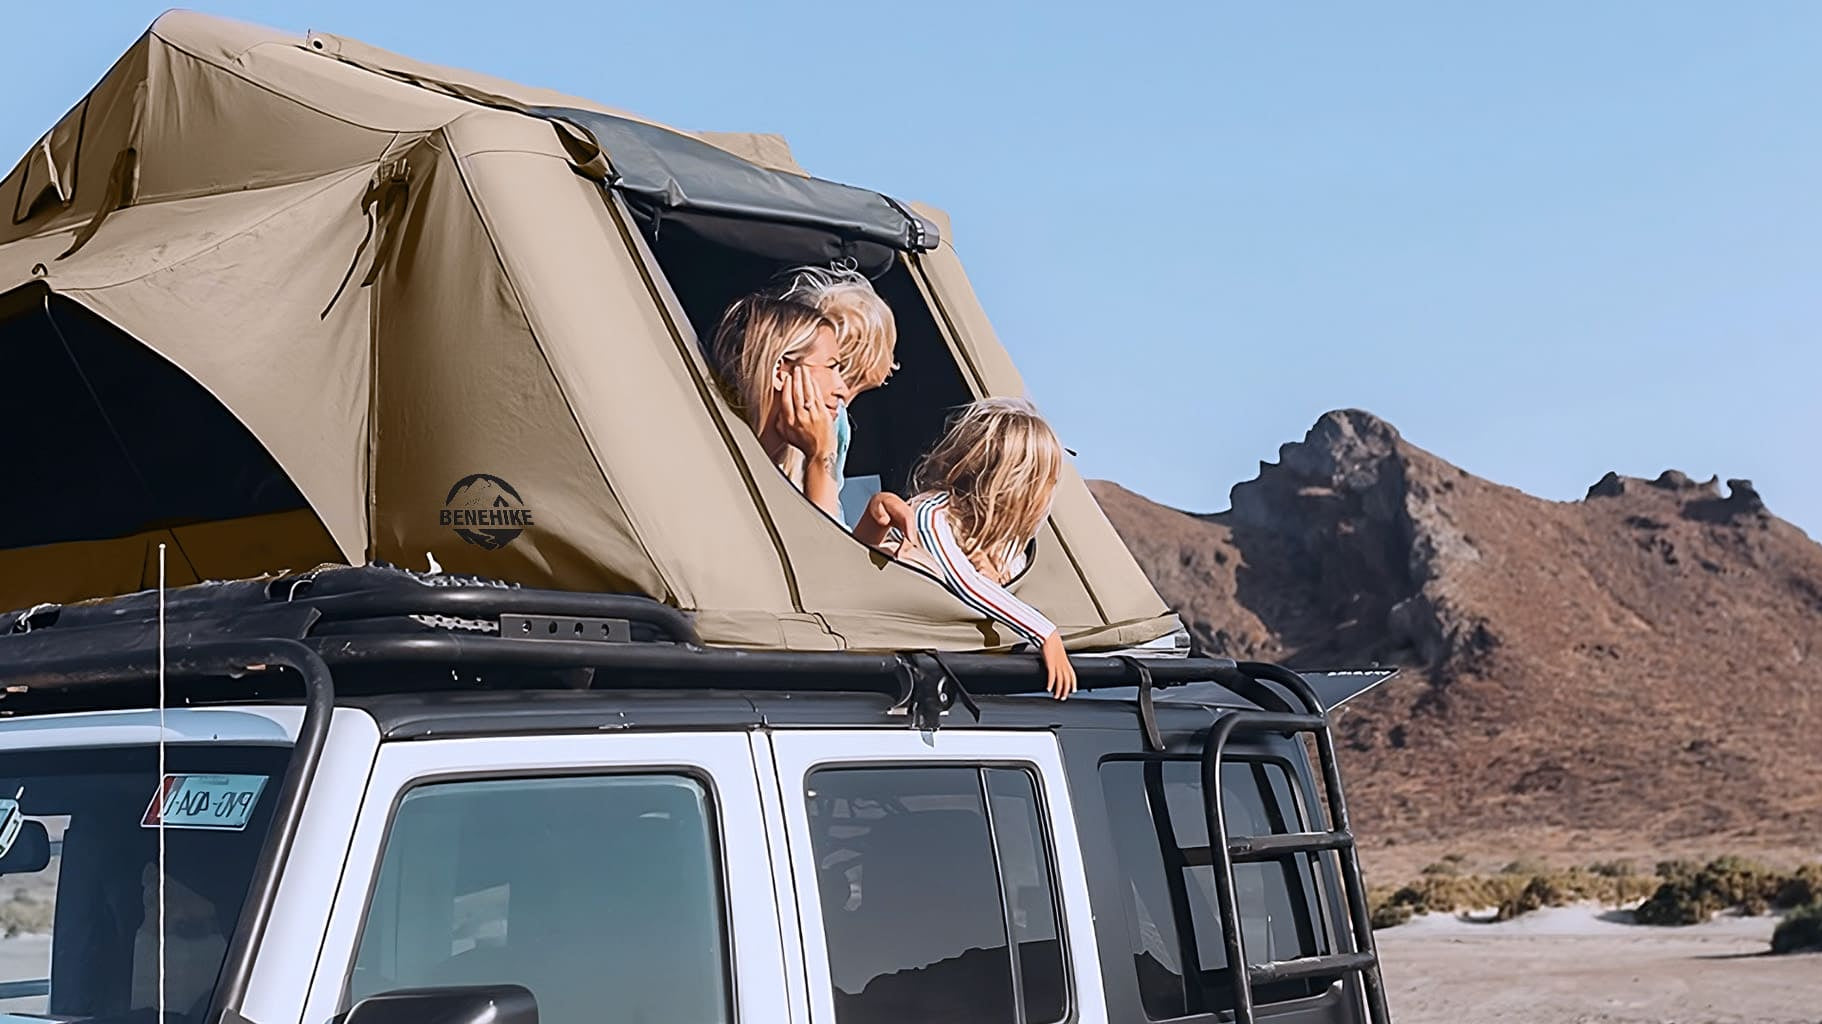 How to use a rooftop tent for camping more comfortably.